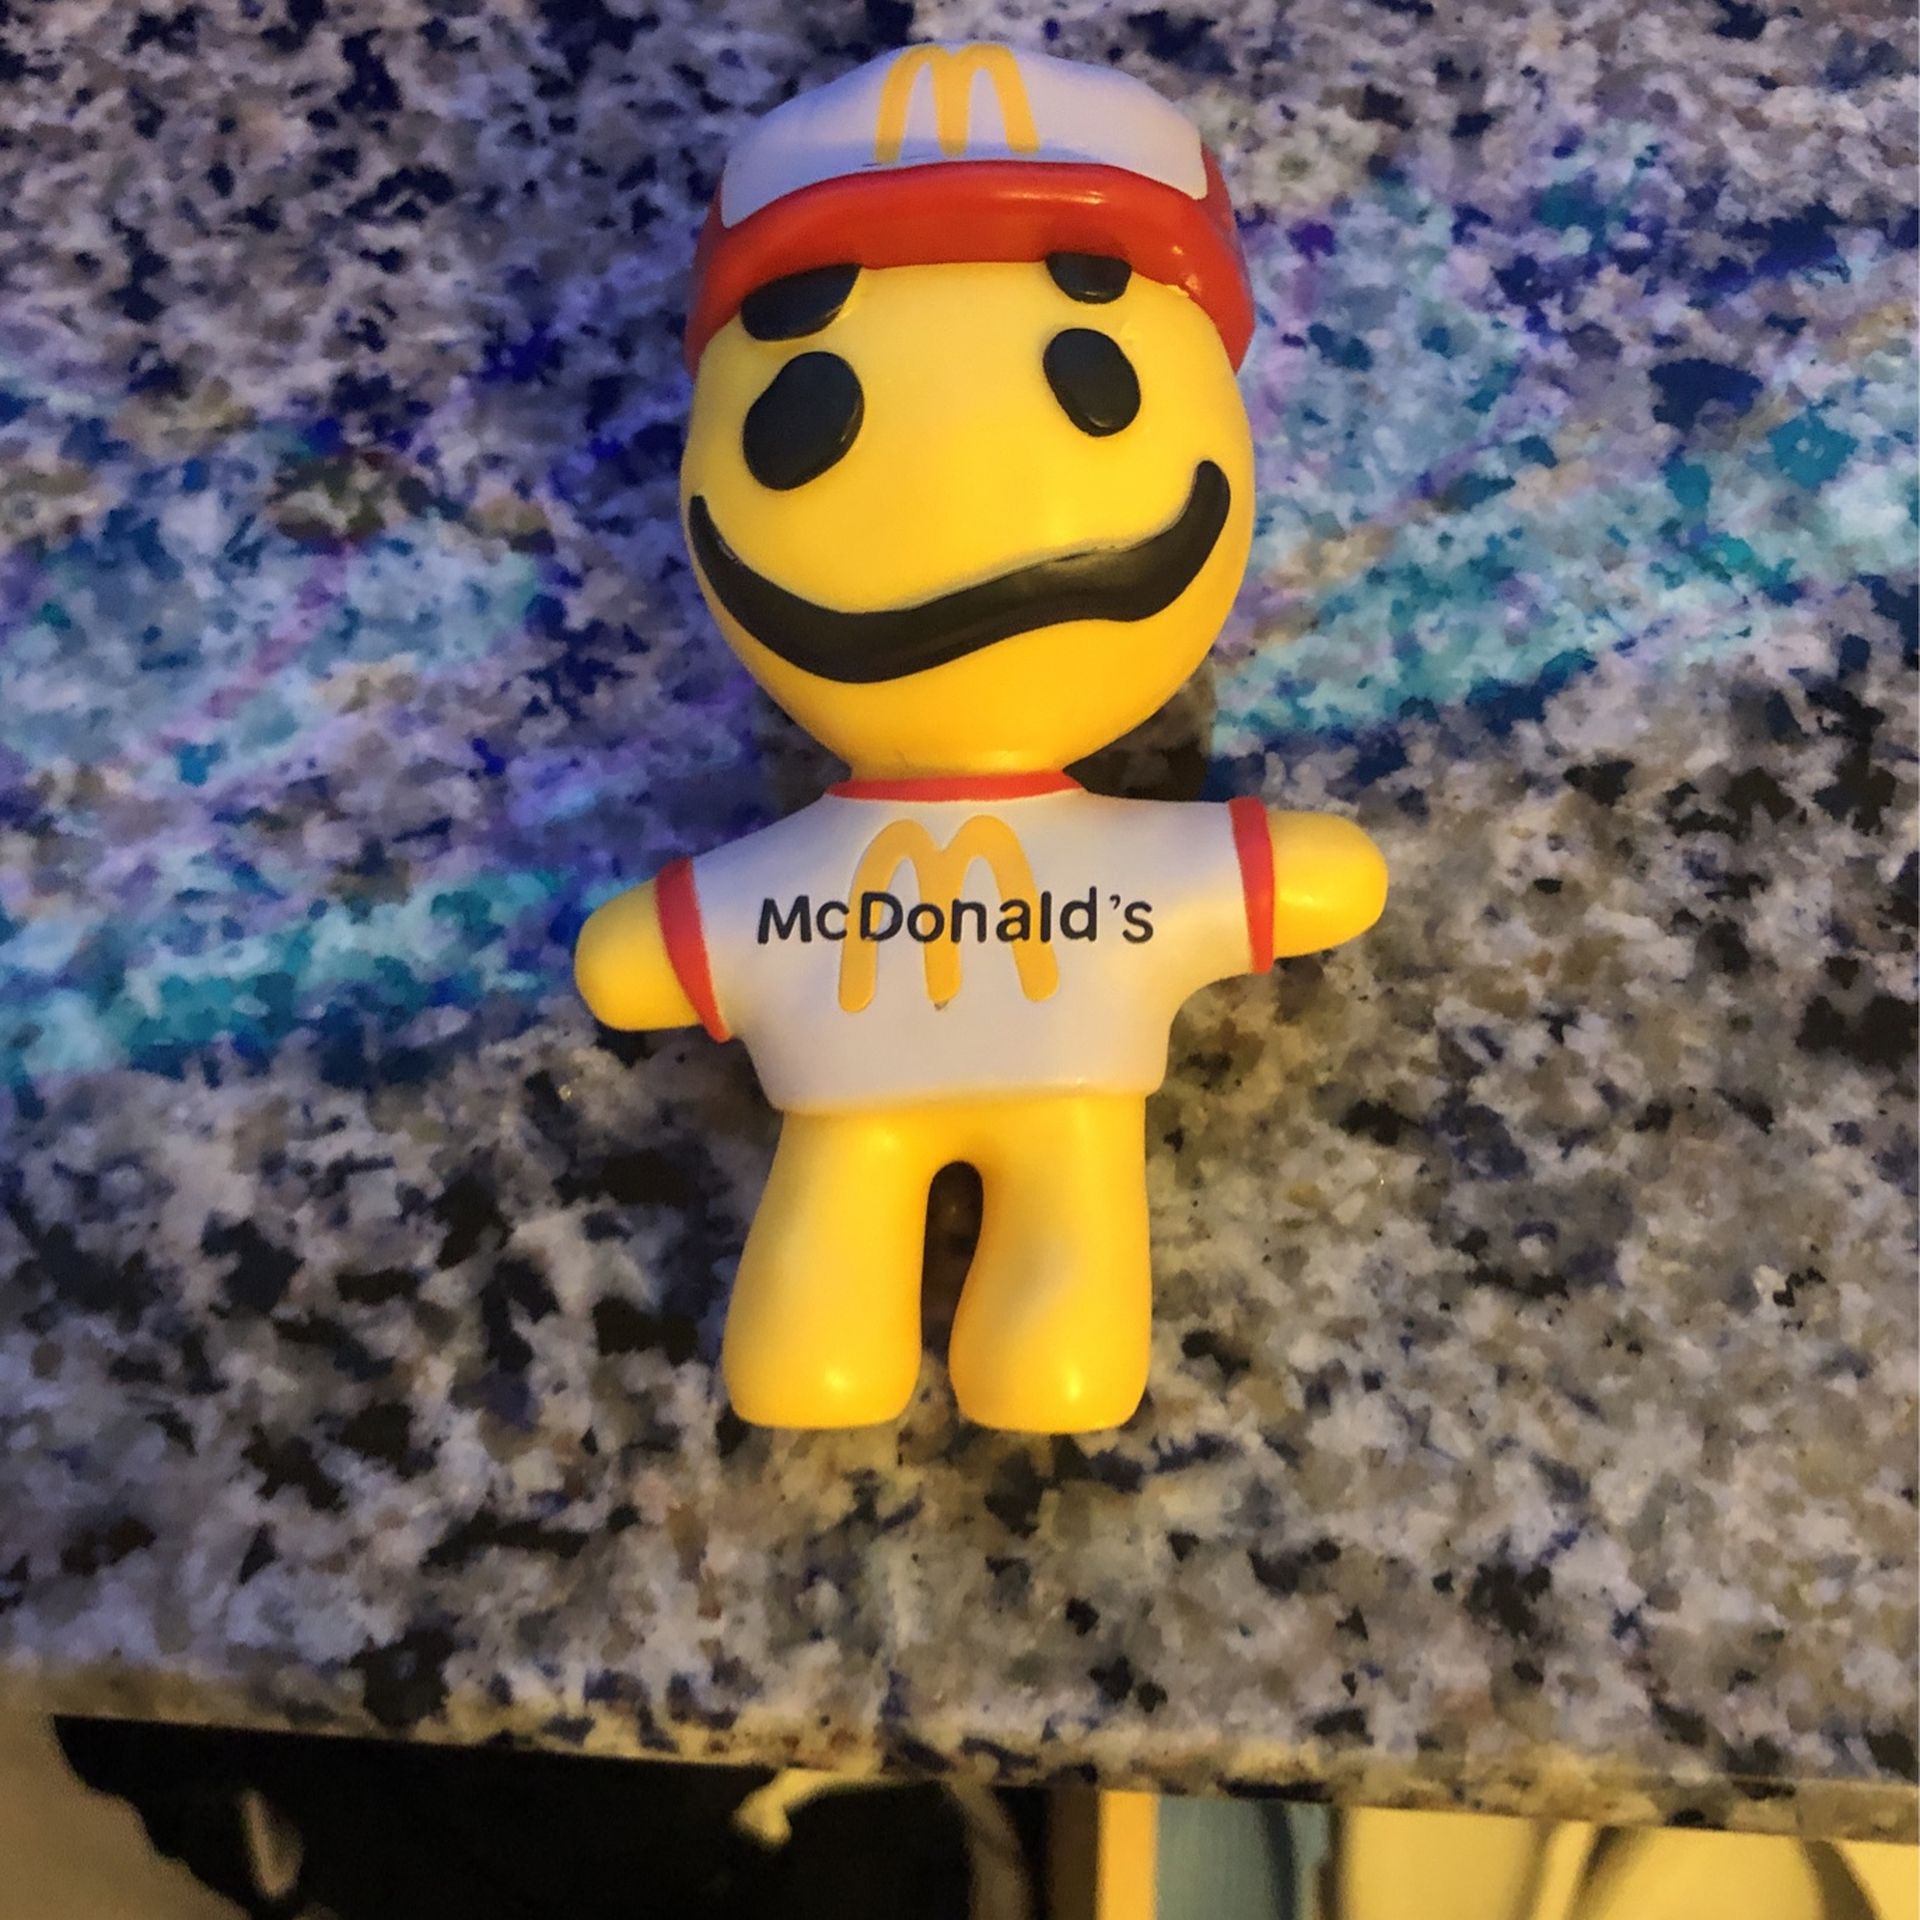 Cactus Plant Flea Market Collectible McDonalds Toy Limited Edition Smiley Guy